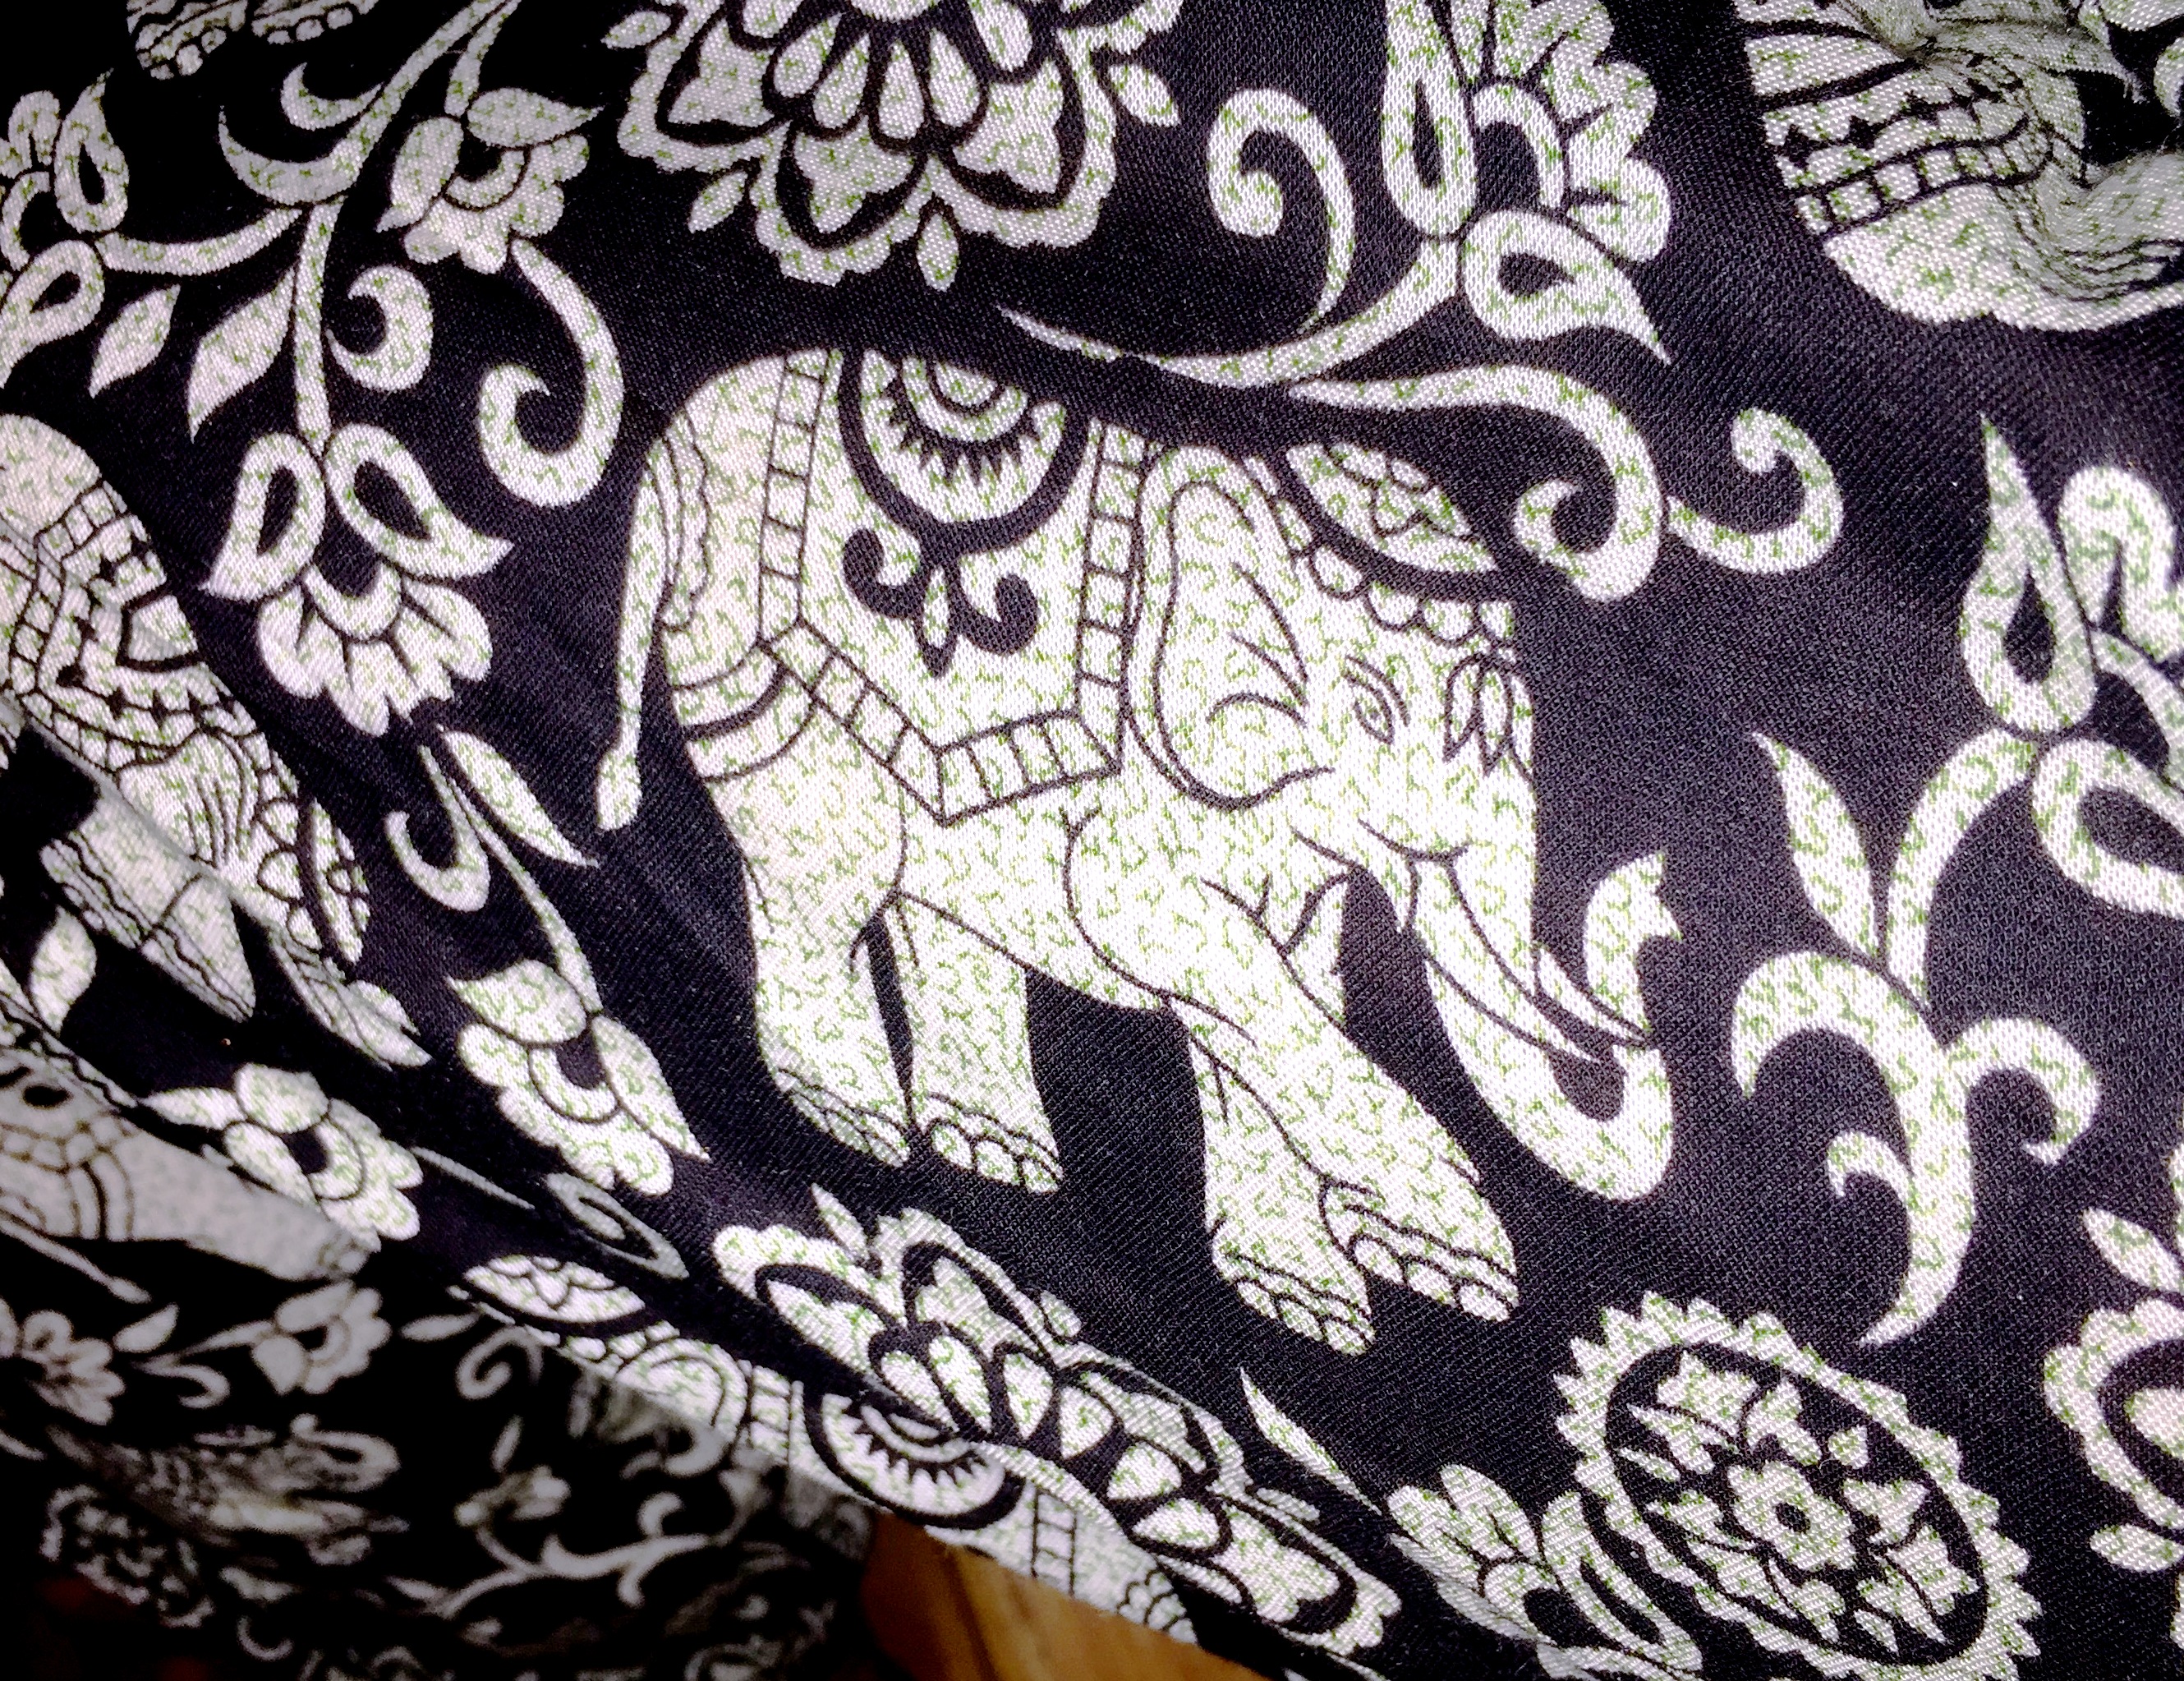 The elephant pants in the room.jpg